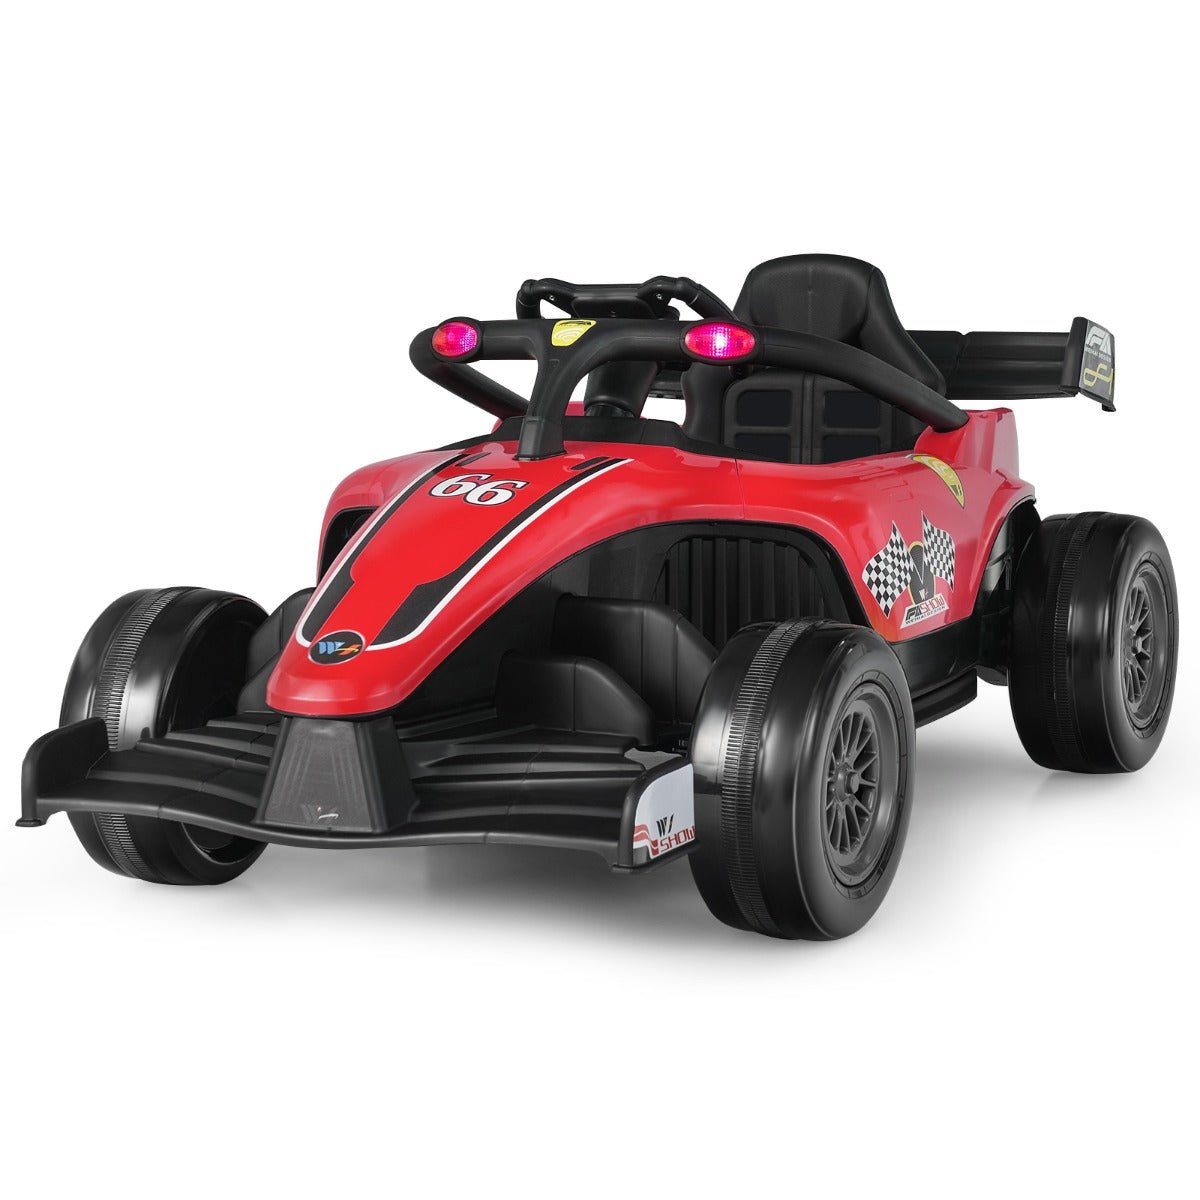 Ride and Race with Our Kids' Racing Car